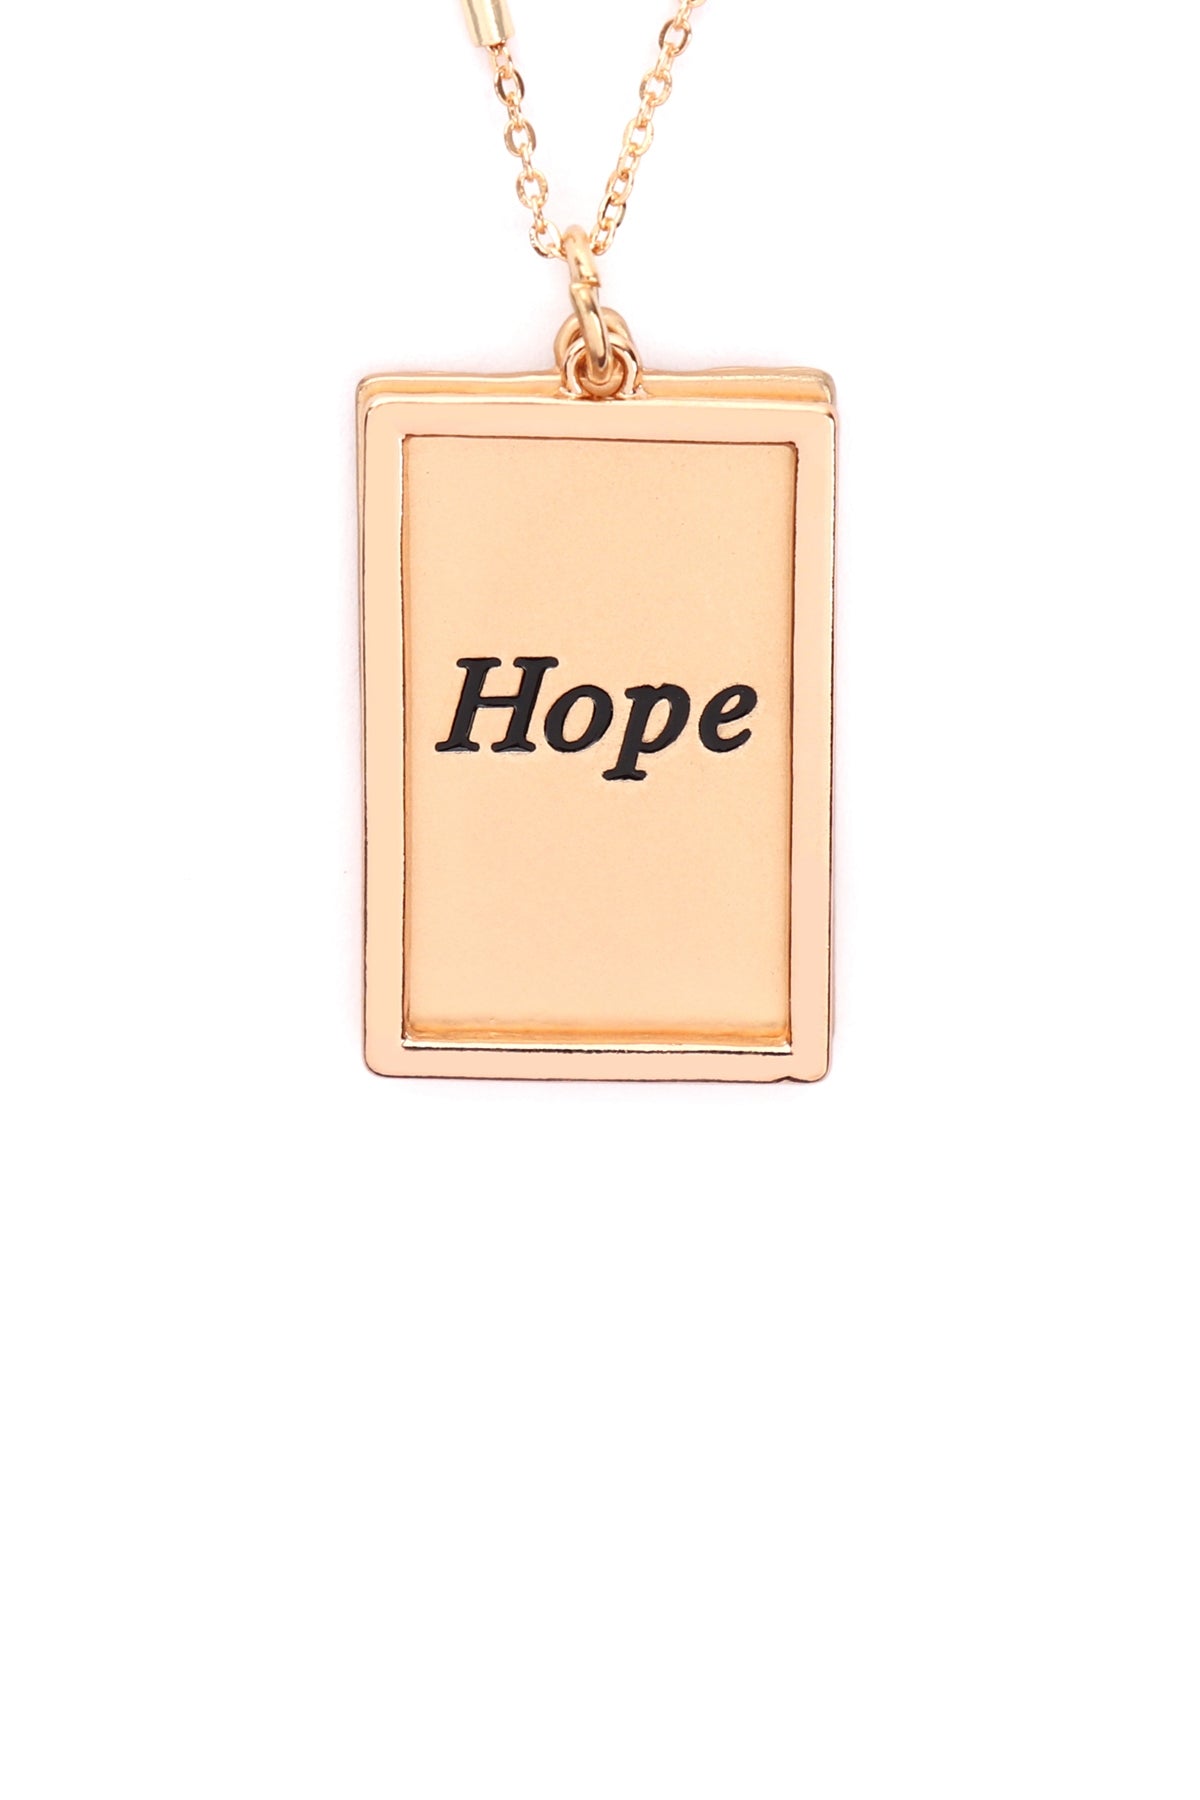 HOPE ETCHED BRASS BOX PENDANT NECKLACE